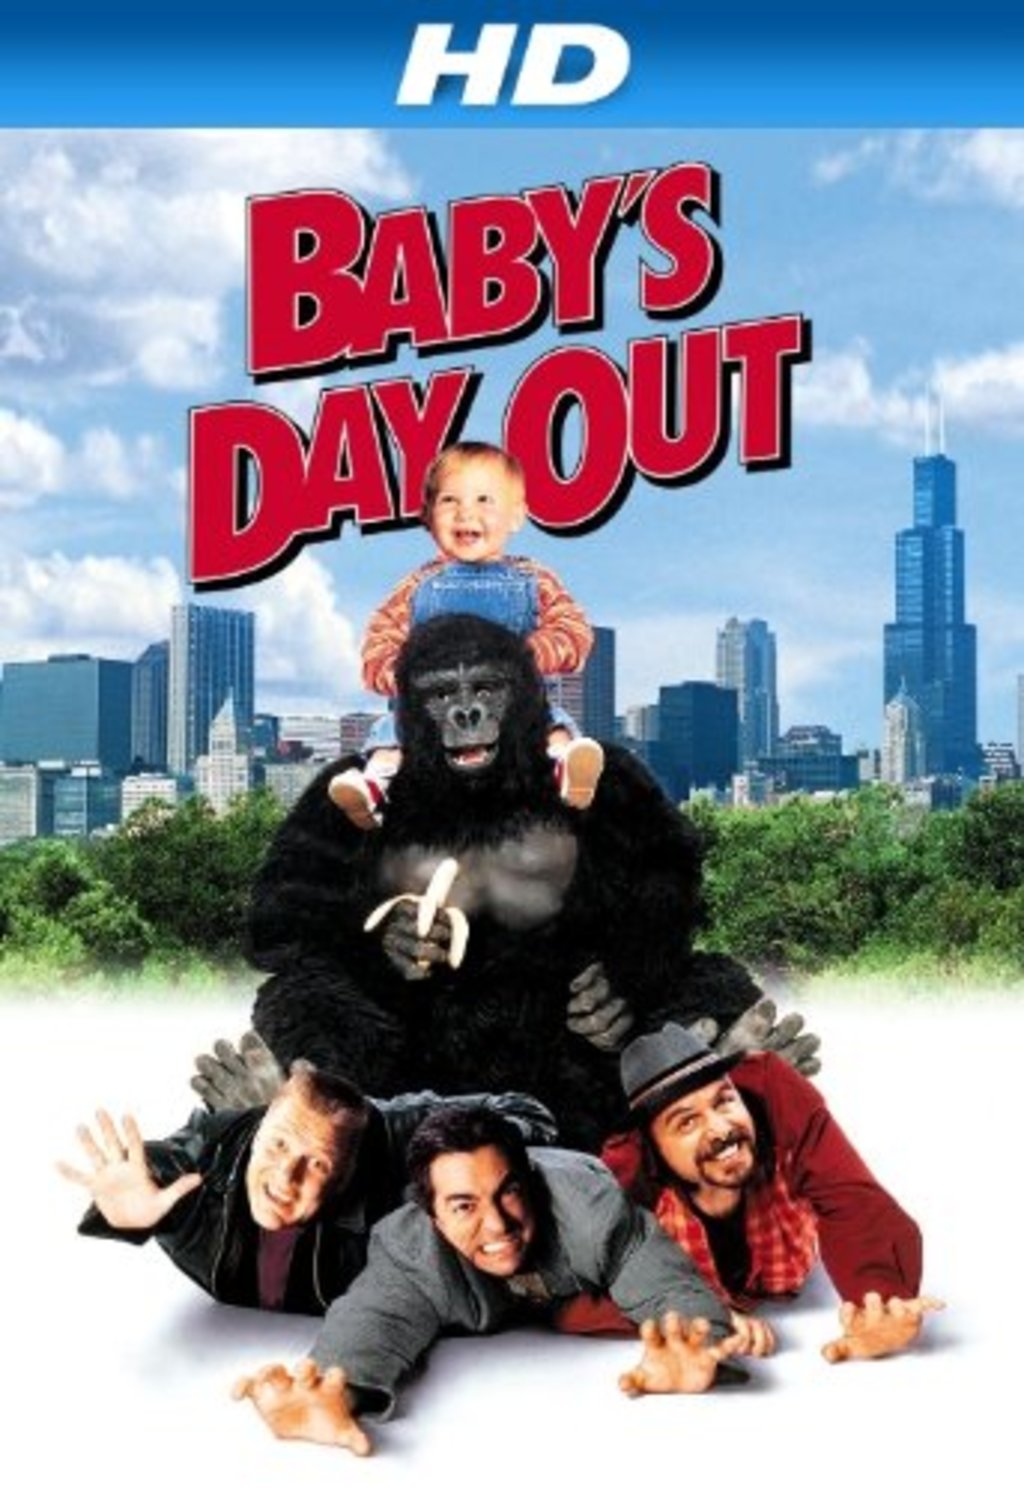 Watch Baby's Day Out on Netflix Today! | NetflixMovies.com